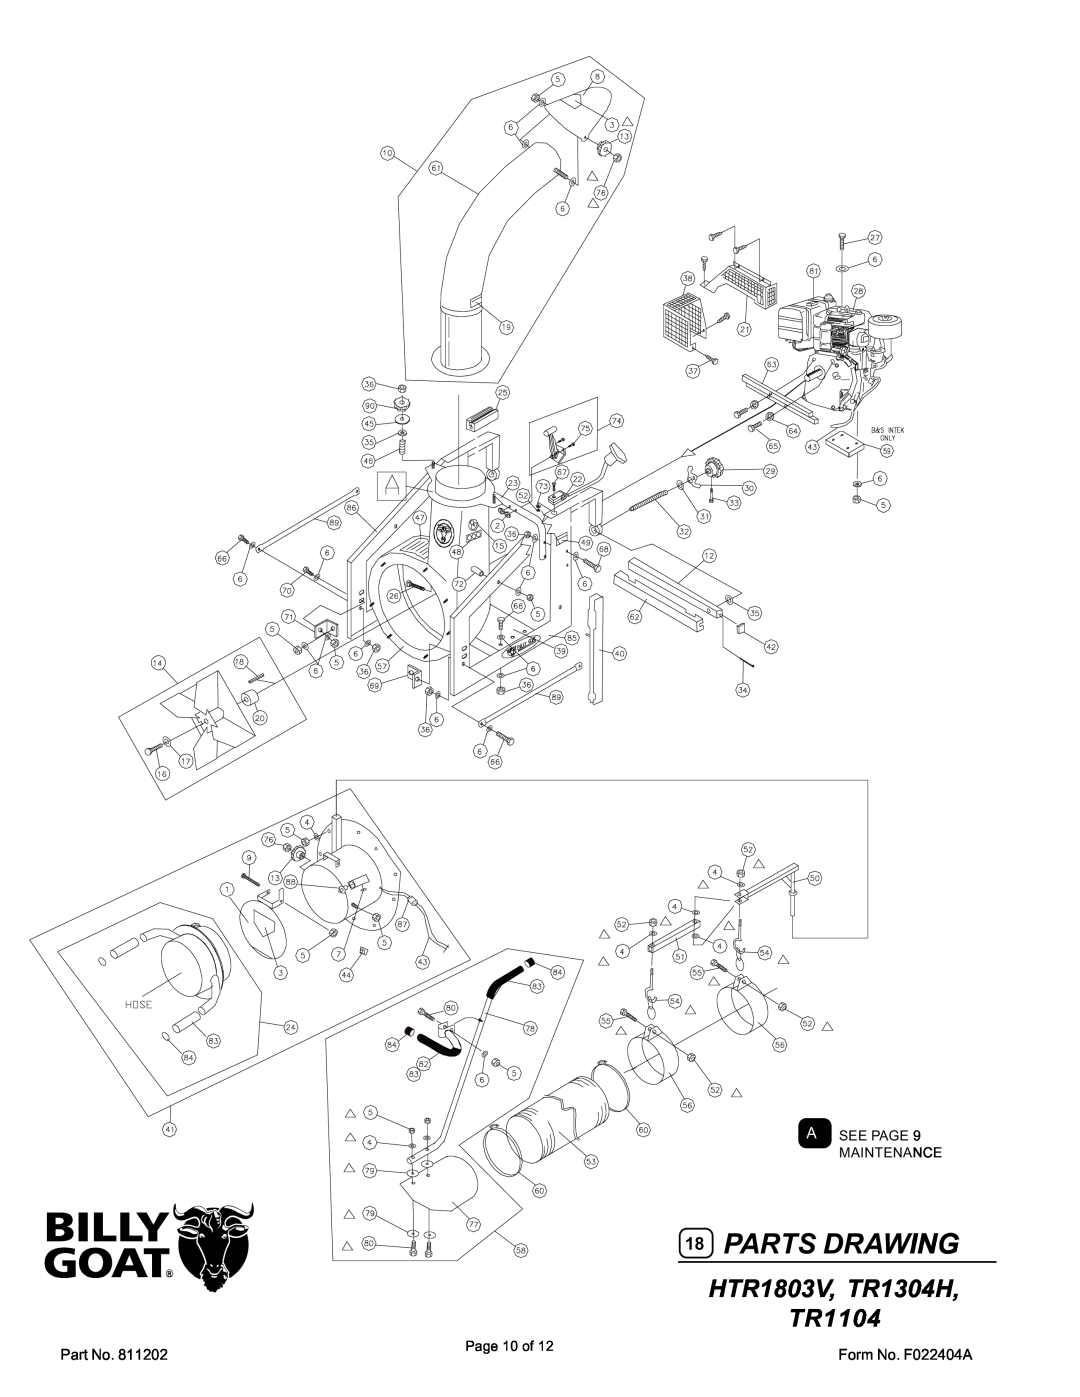 Billy Goat specifications Parts Drawing, HTR1803V, TR1304H TR1104 